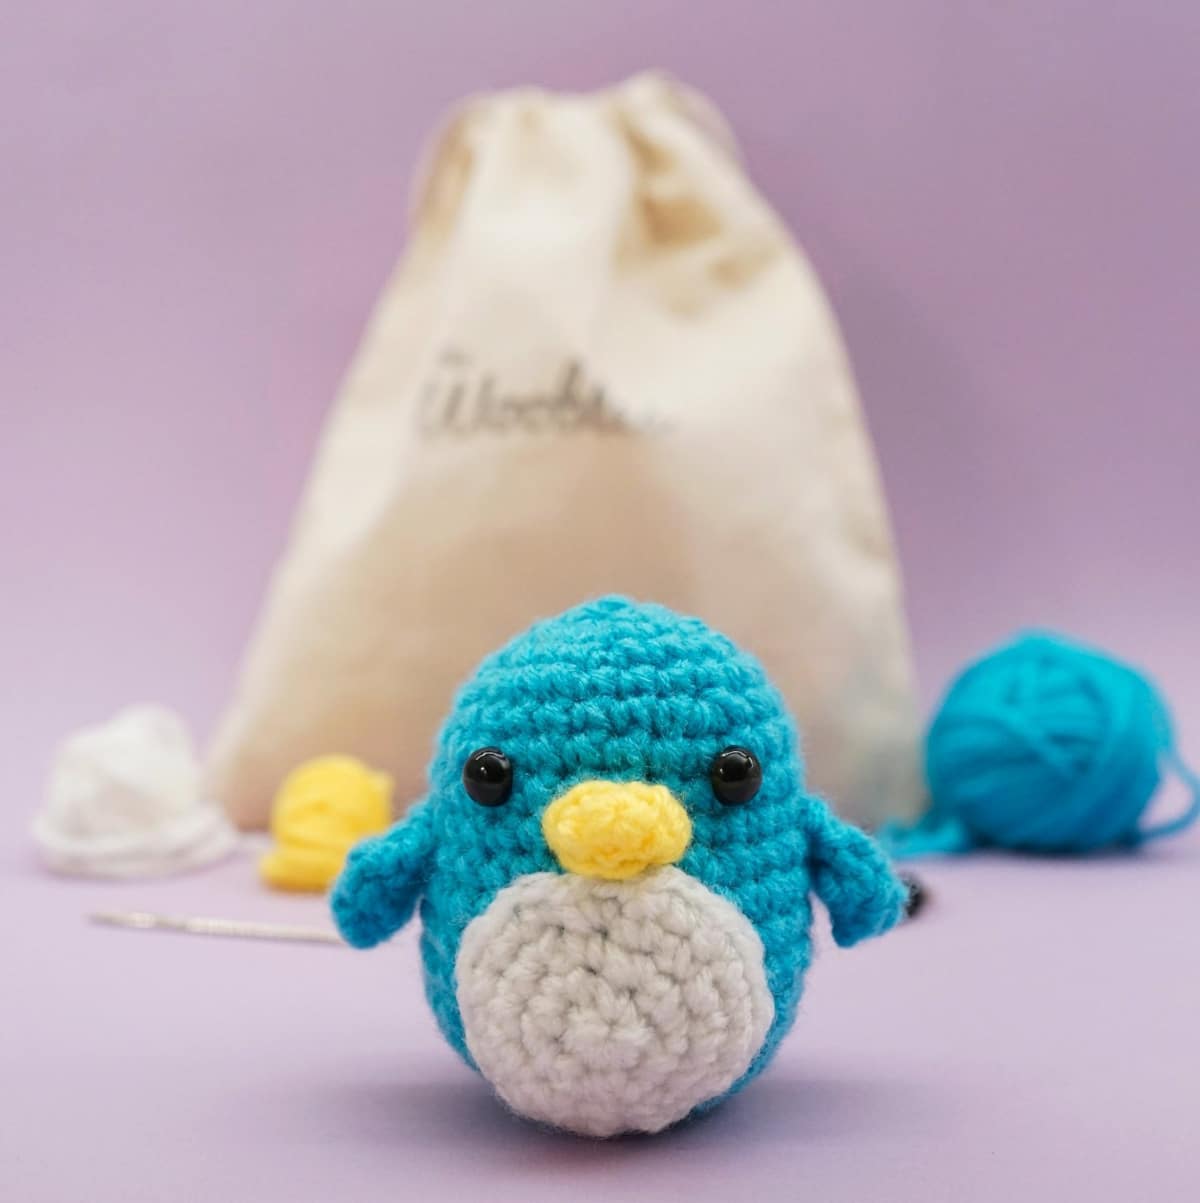 Small crochet blue penguin with a white chest, yellow nose, and black eyes in front of a pink background, brown bag, and balls of yarn.